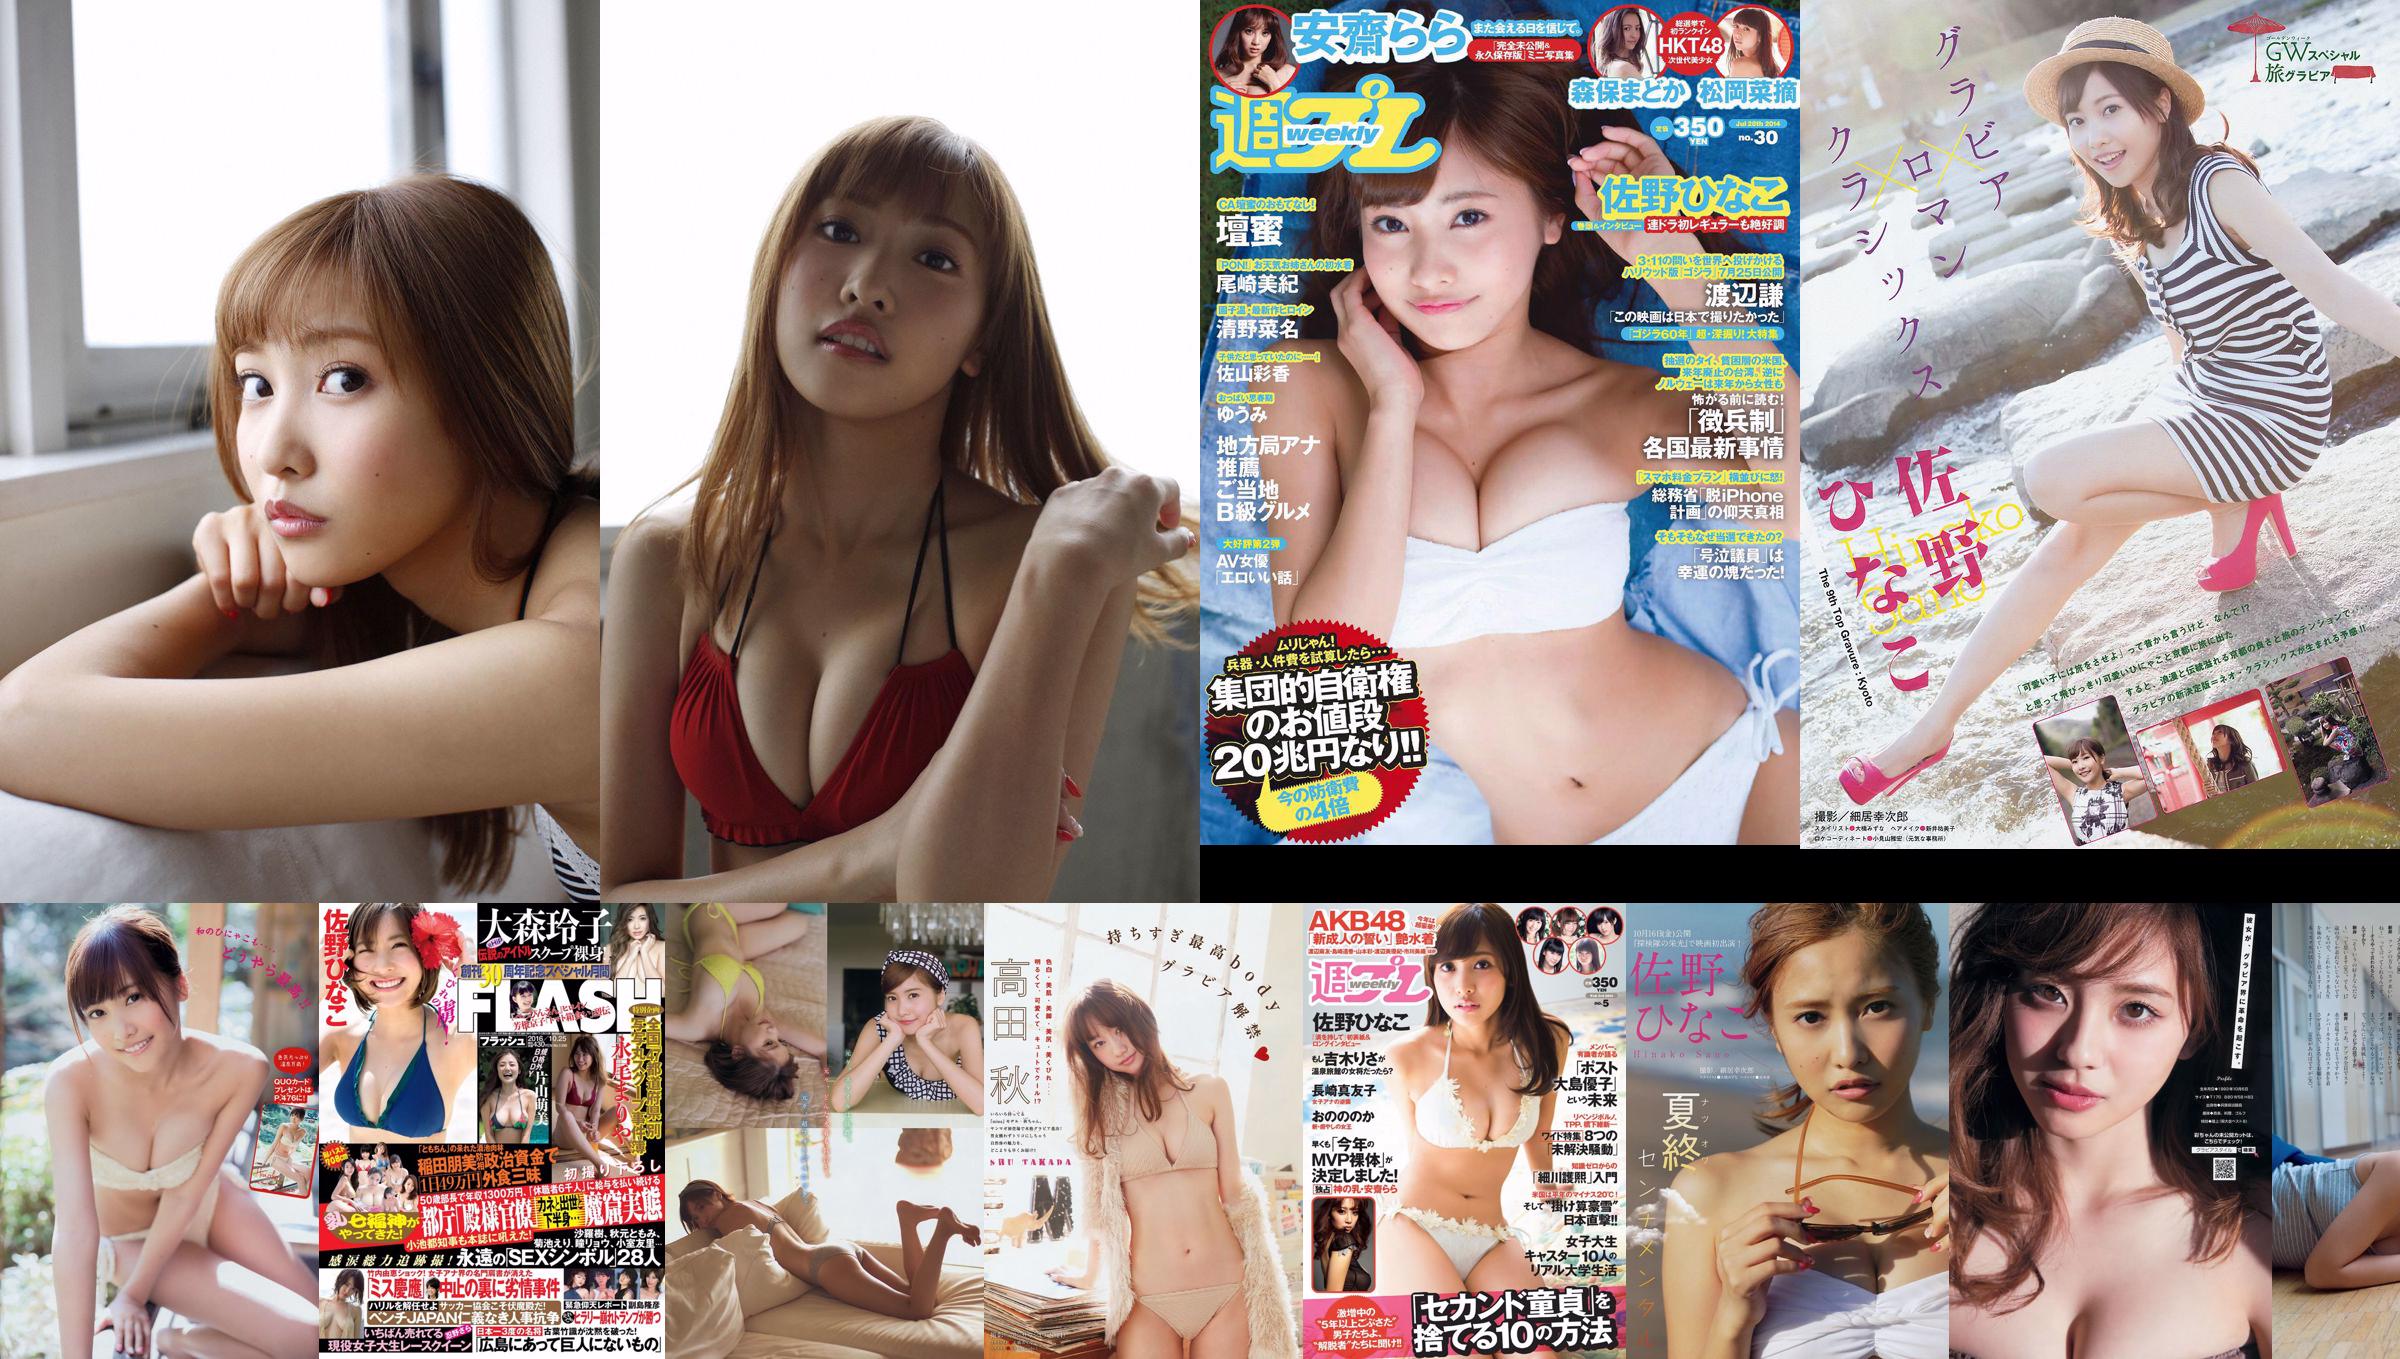 Sano Hinako "relax over the weekend" [WPB-net] No.179 No.f2d670 Page 1